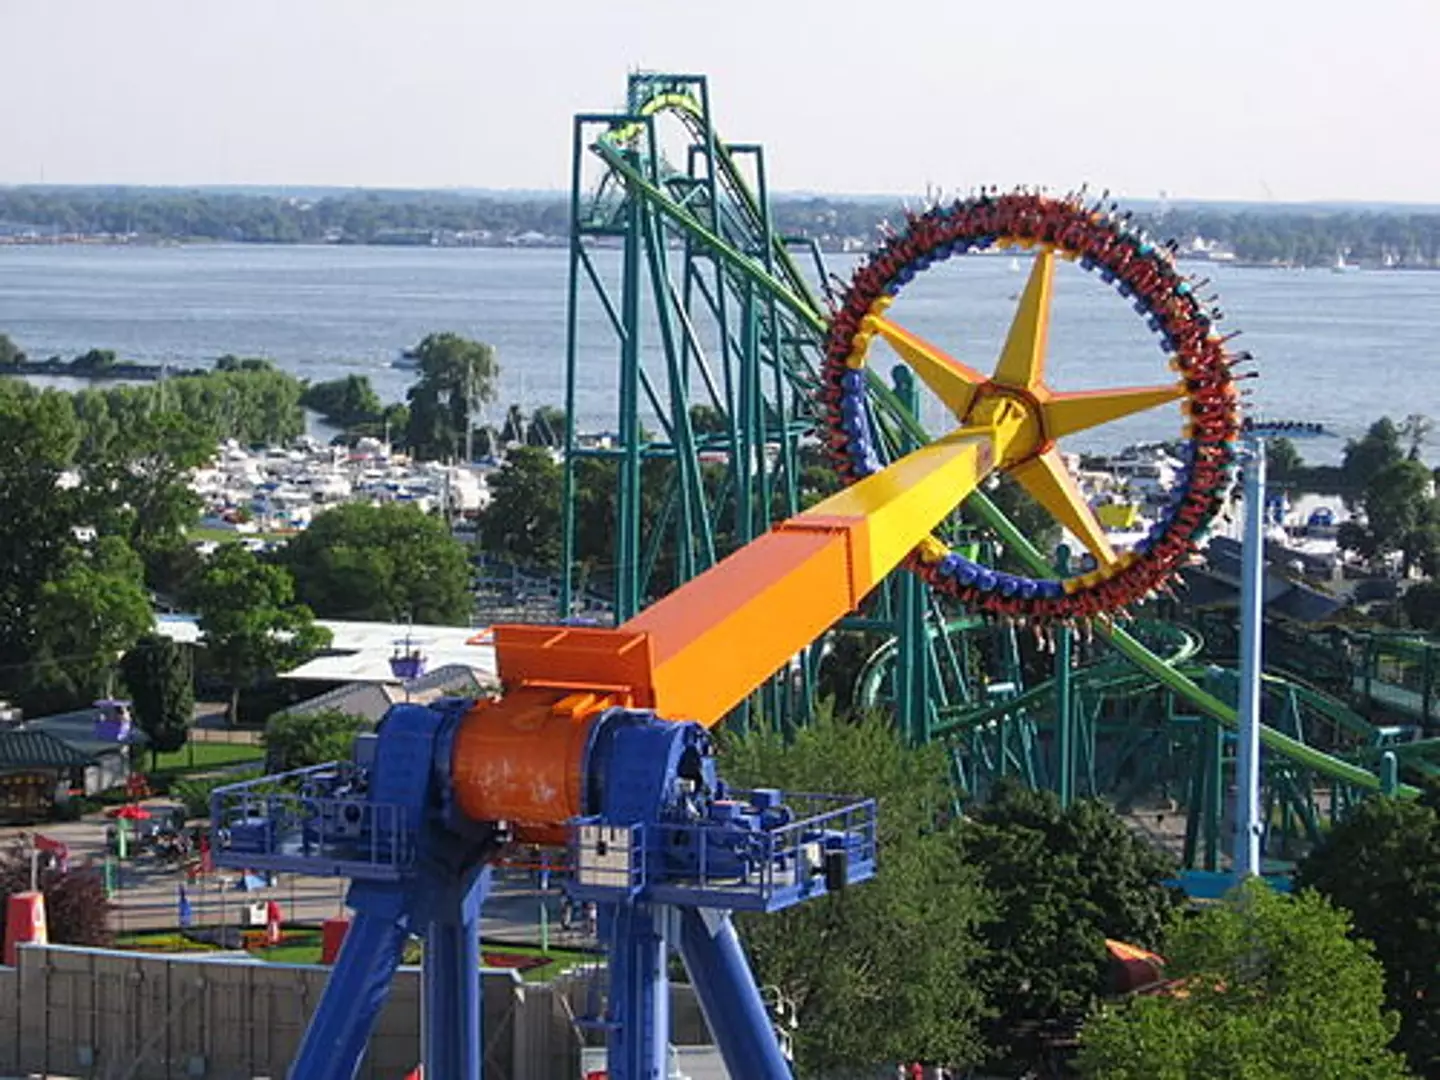 A couple have been charged for with public indecency for having sex at Cedar Point amusement park in Ohio.